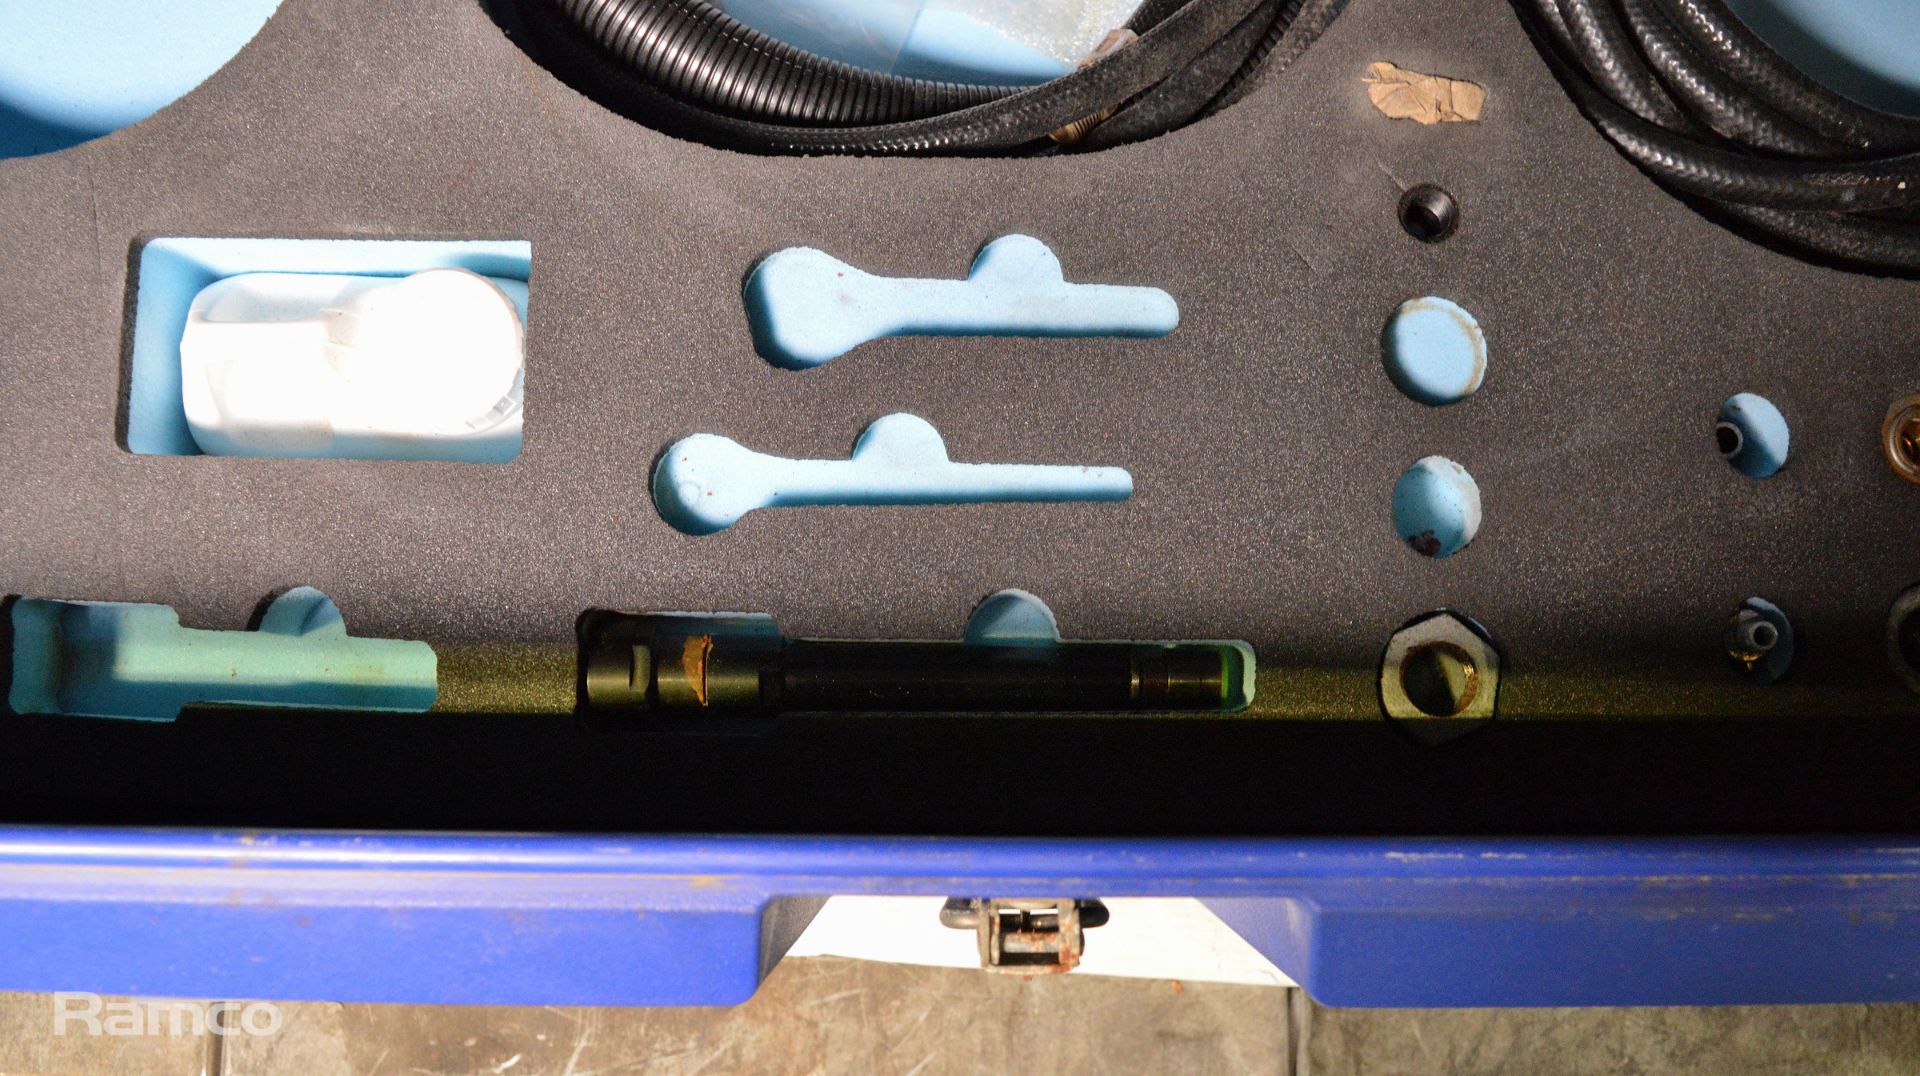 Corrosion removal kit in carry case - Image 8 of 9